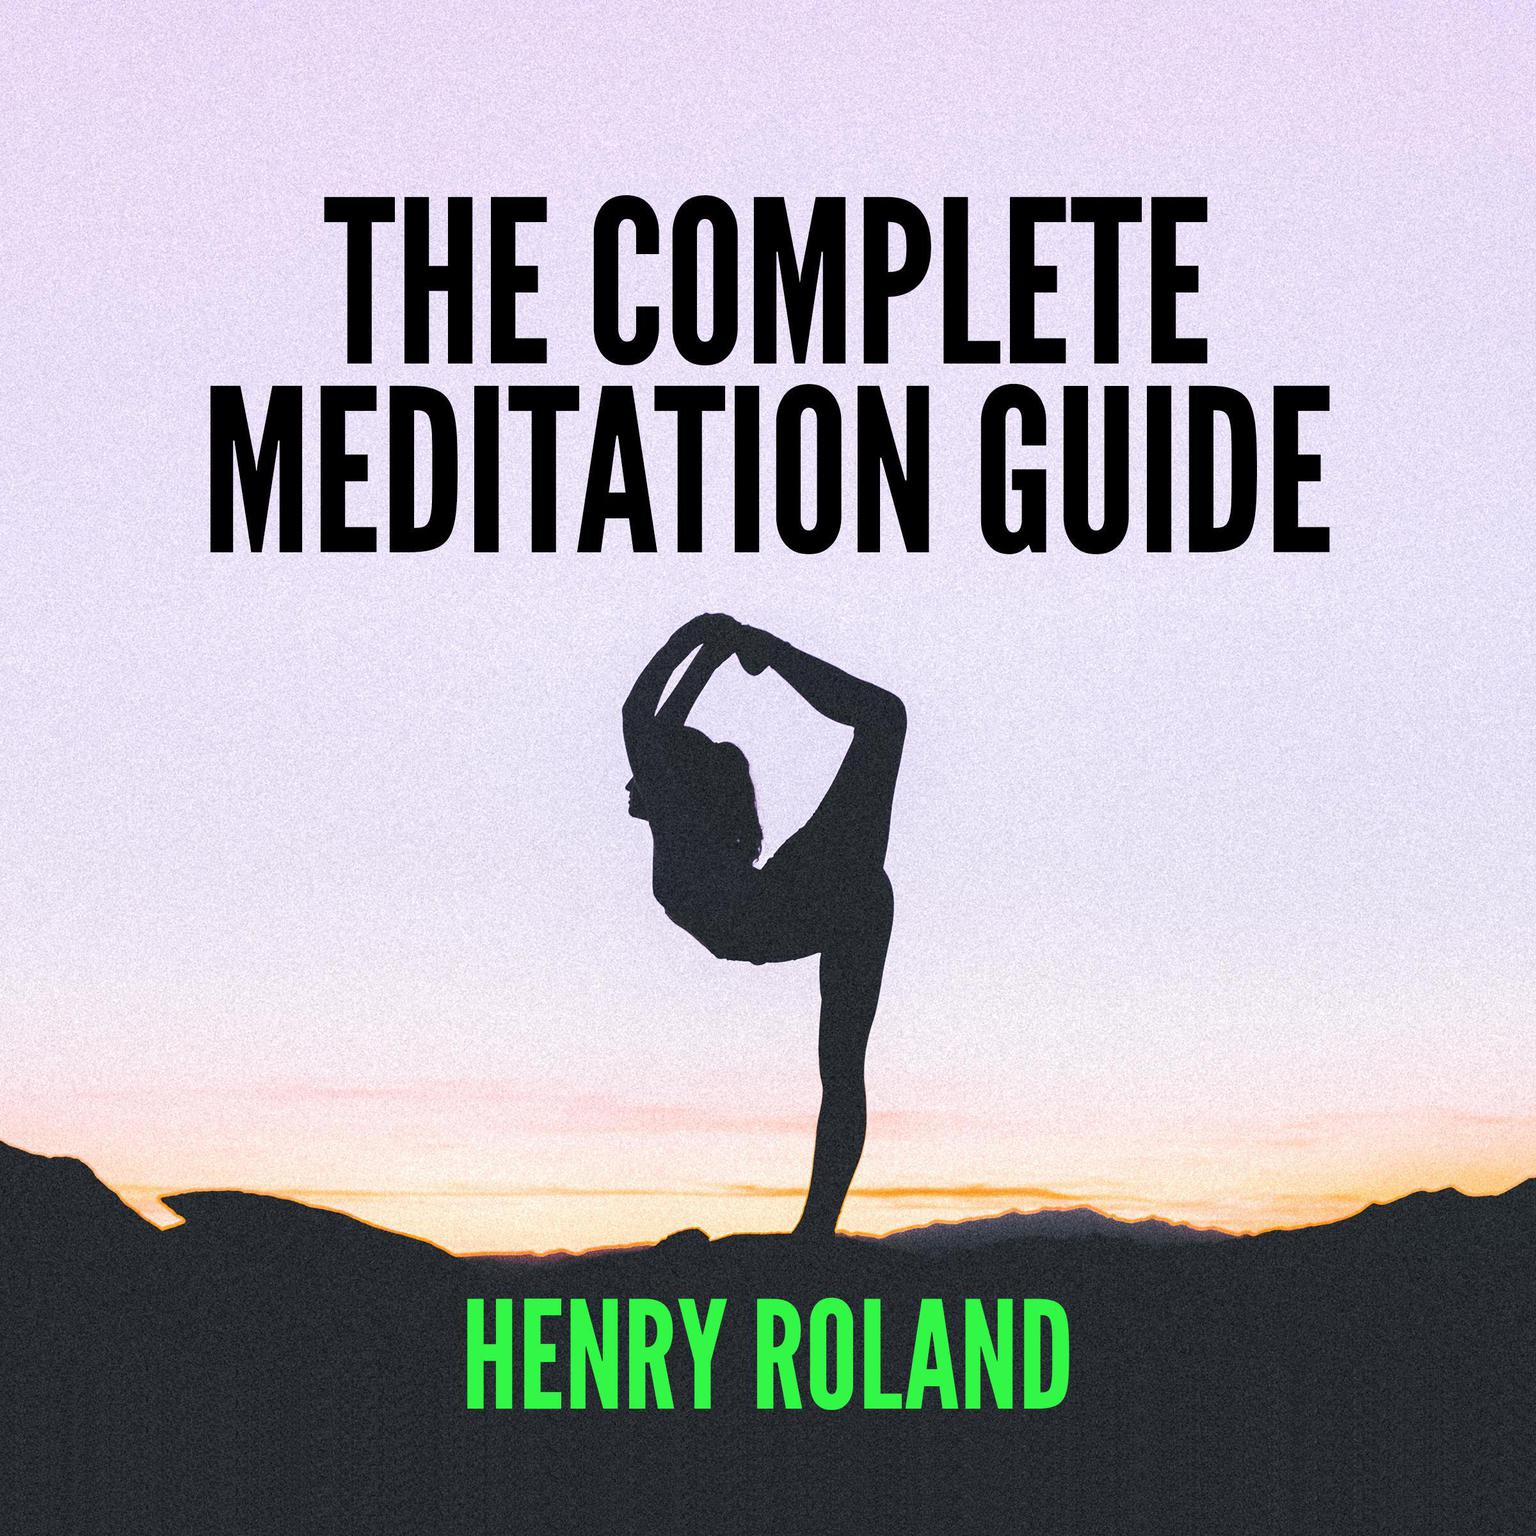 The Complete Meditation Guide Audiobook, by Henry Roland